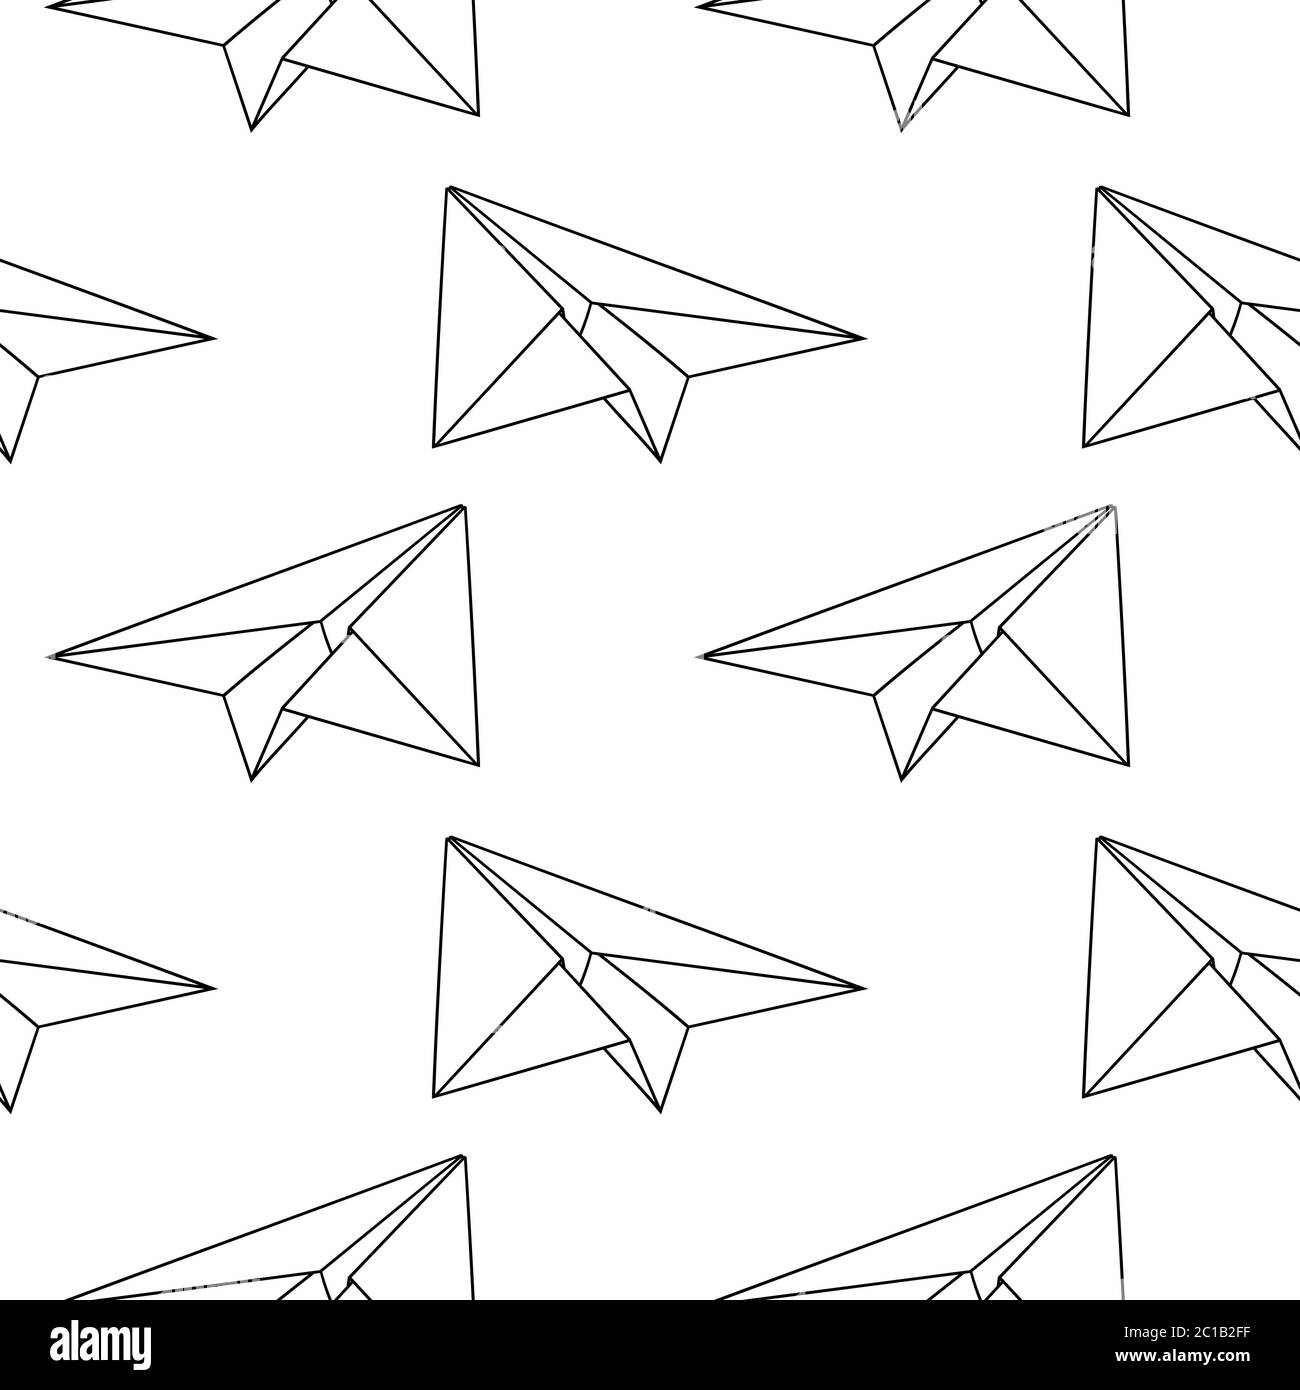 Paper planes. Black and white seamless pattern Stock Vector